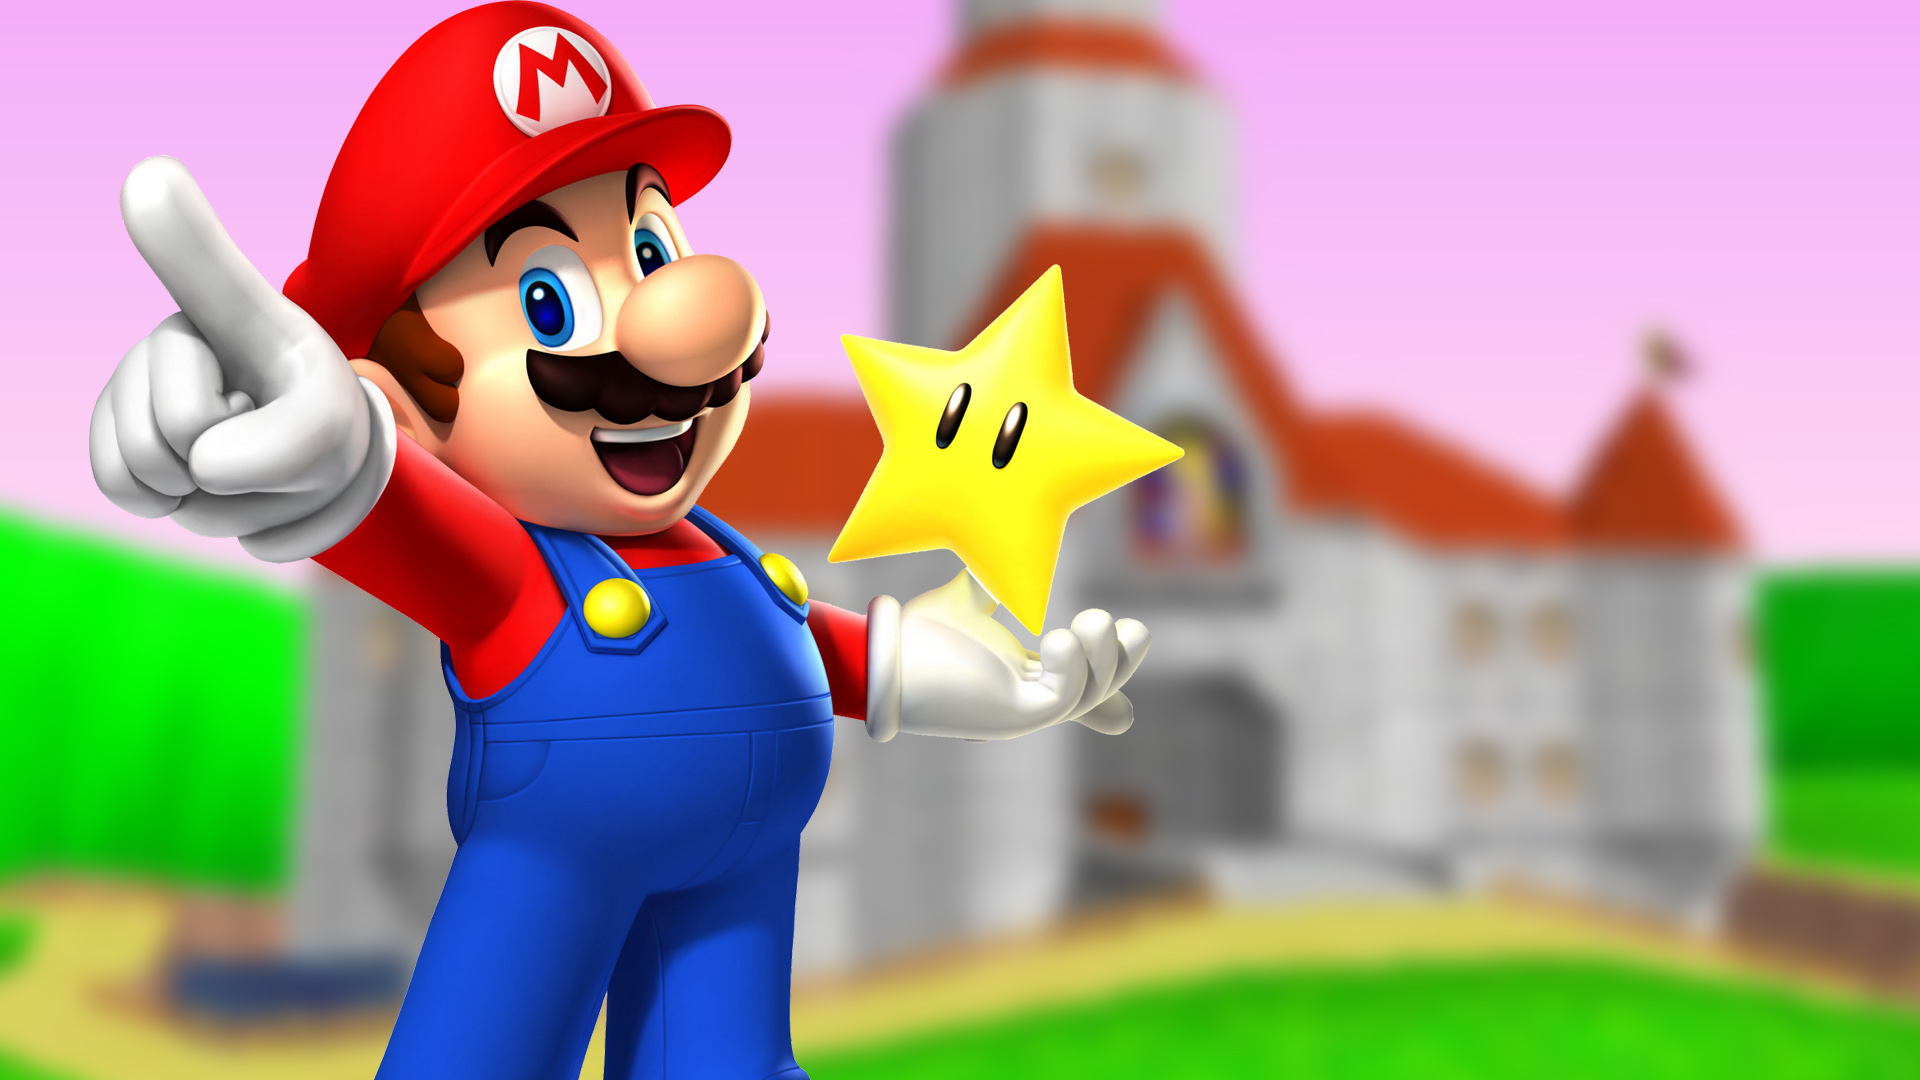 Every World In Super Mario Bros. 3, Ranked From Worst To Best